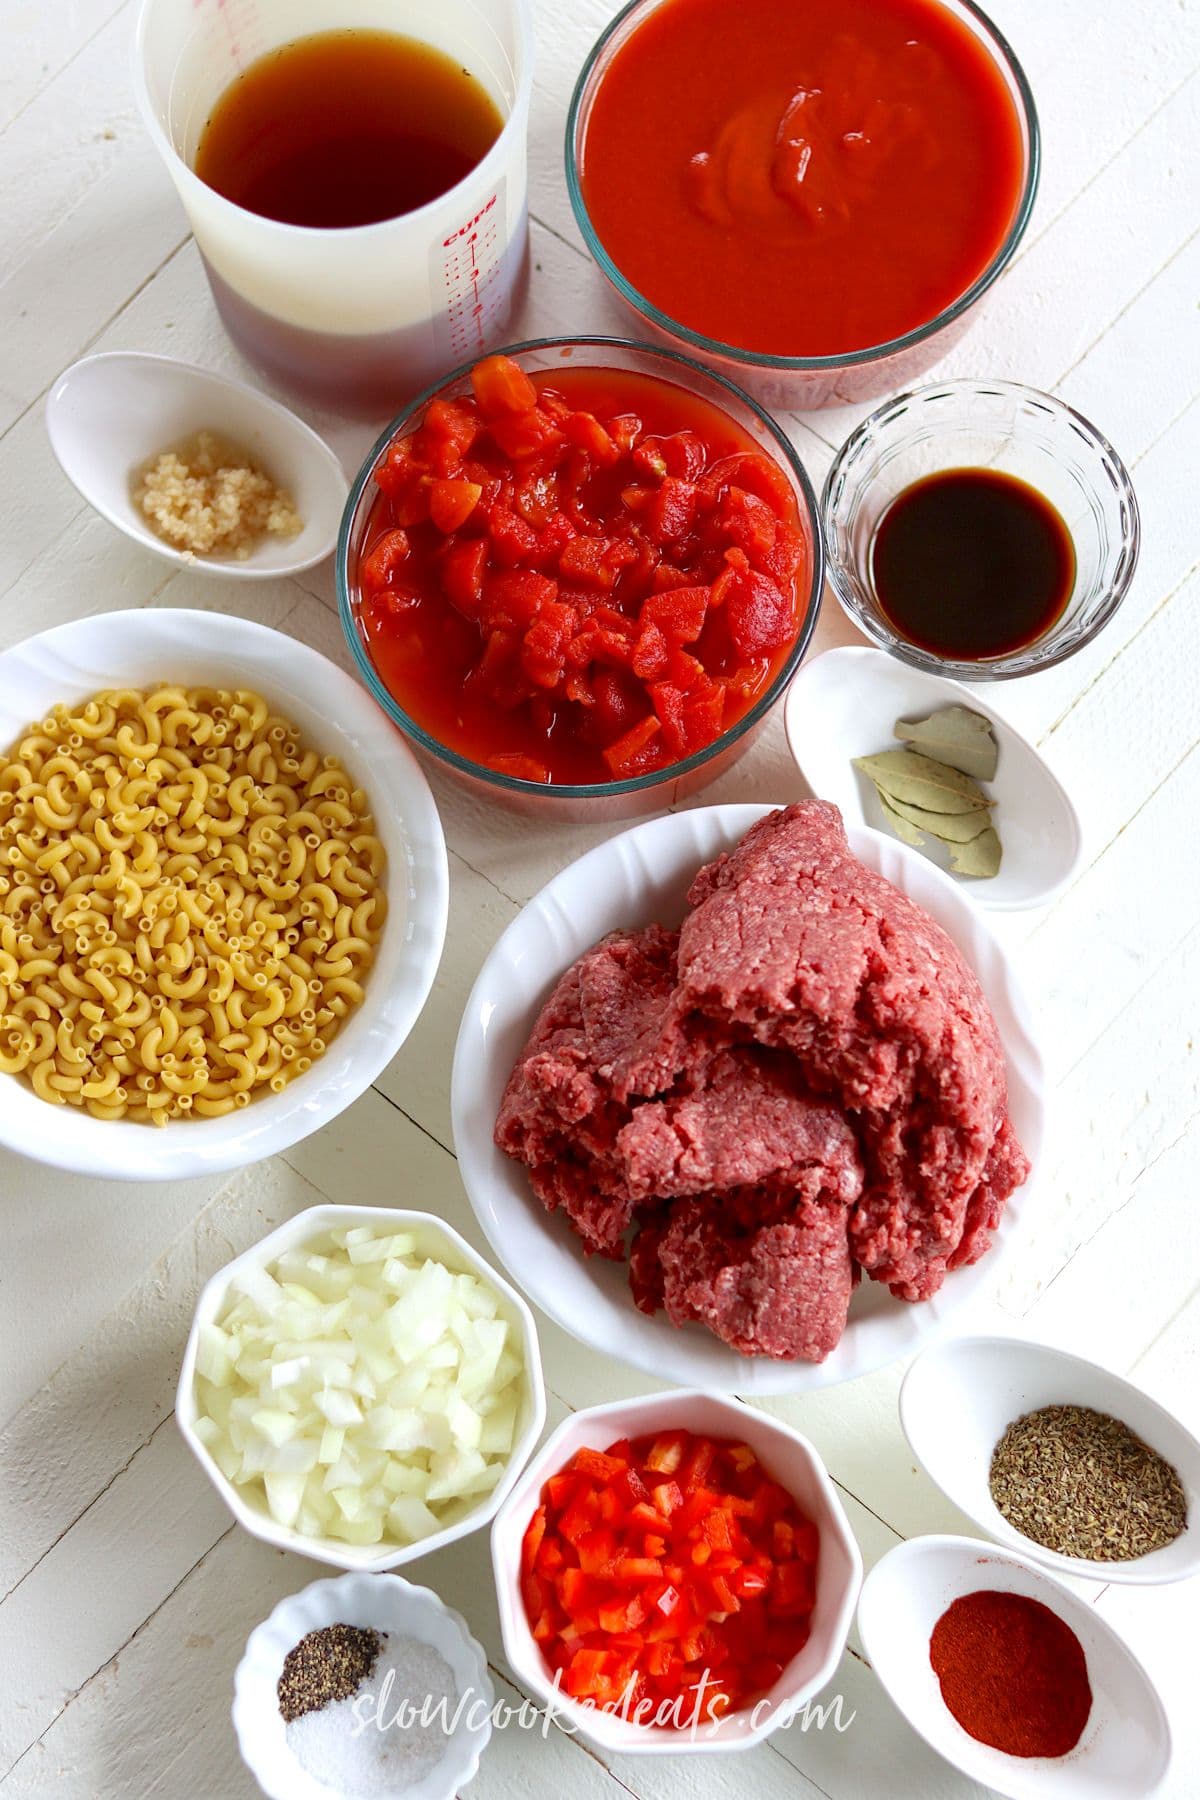 Ingredients needed for making crock pot american goulash in slow cooker.